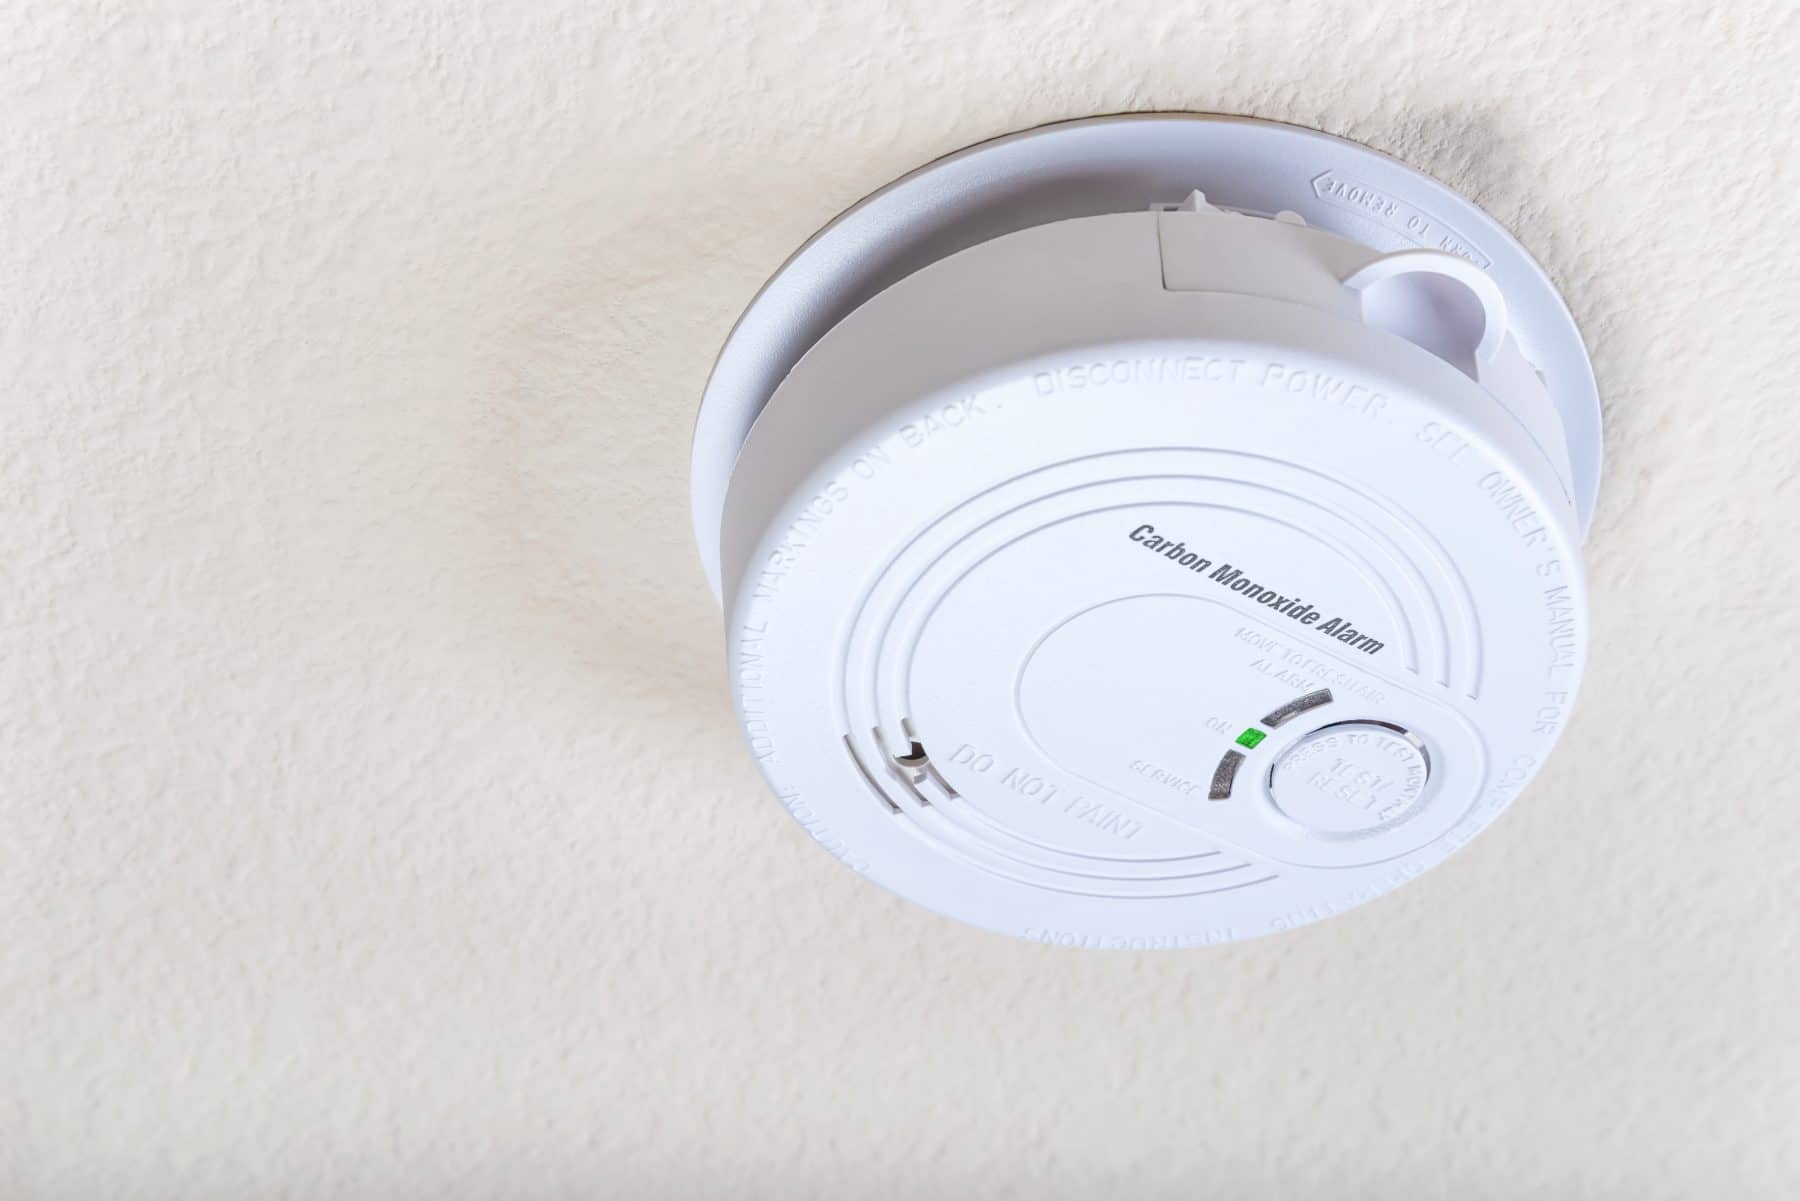 Fire department offers free carbon monoxide detectors | City of Pittsburg Hot Water Heater Set Off Carbon Monoxide Detector